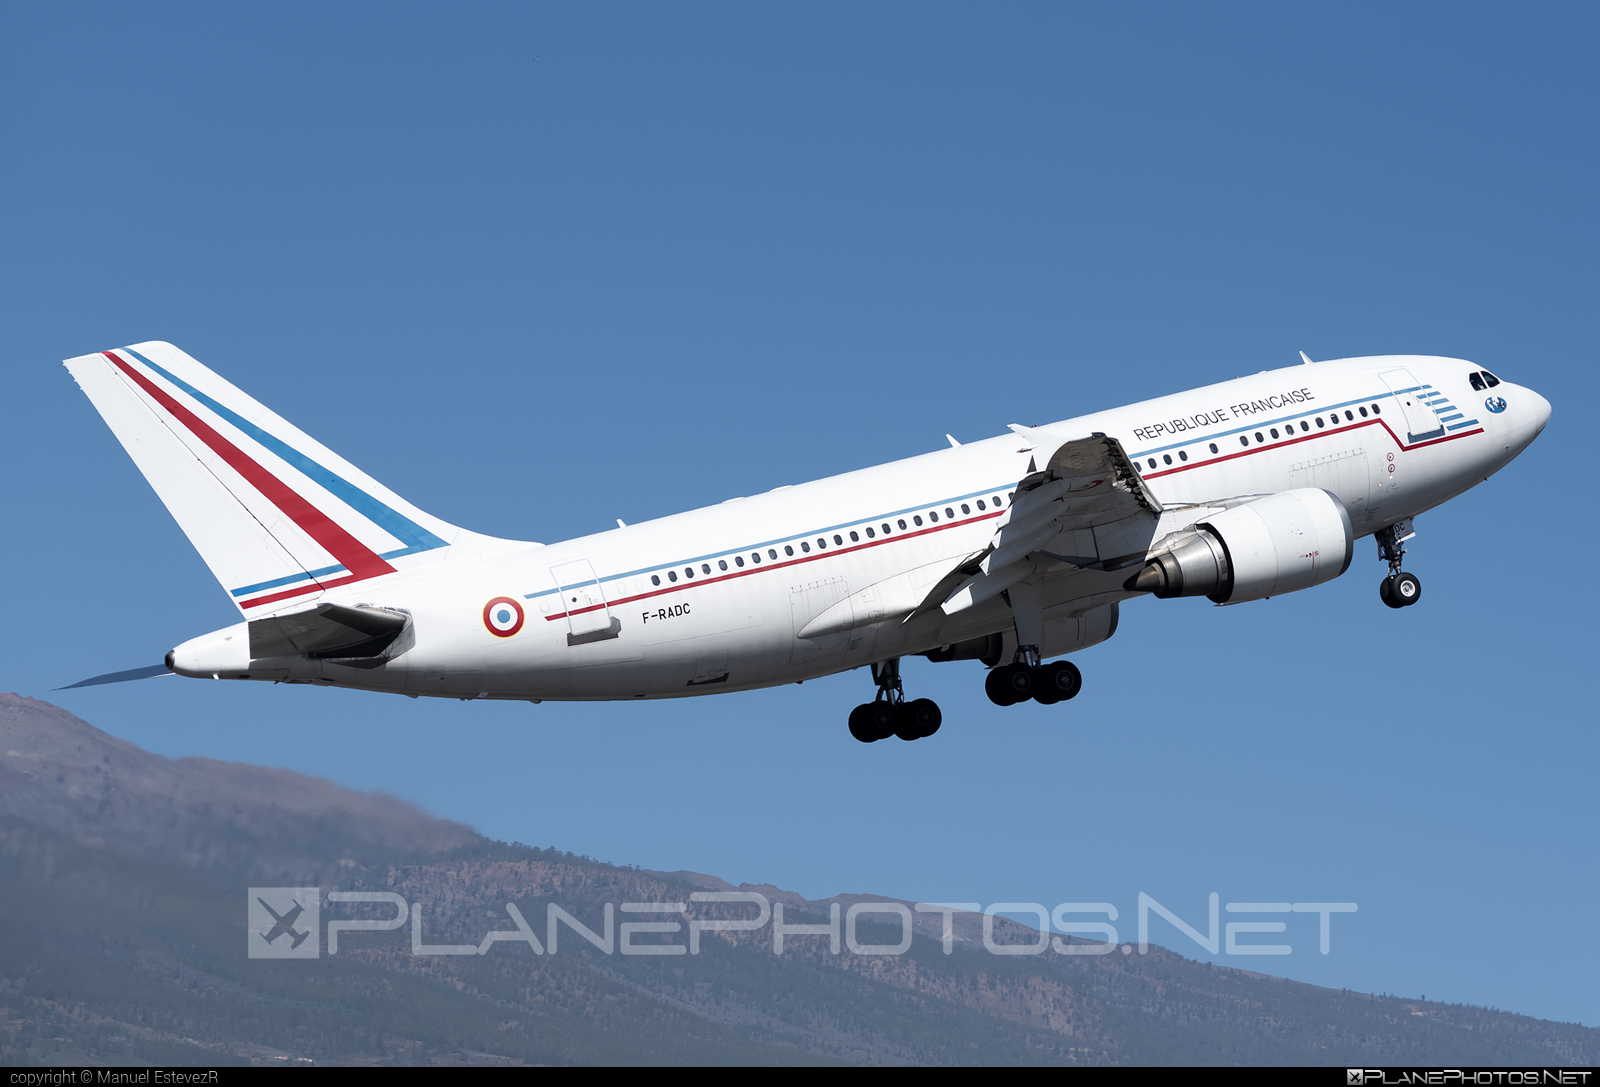 Airbus A310-304 - F-RADC operated by Armée de l´Air (French Air Force) #a310 #airbus #airbus310 #armeedelair #frenchairforce